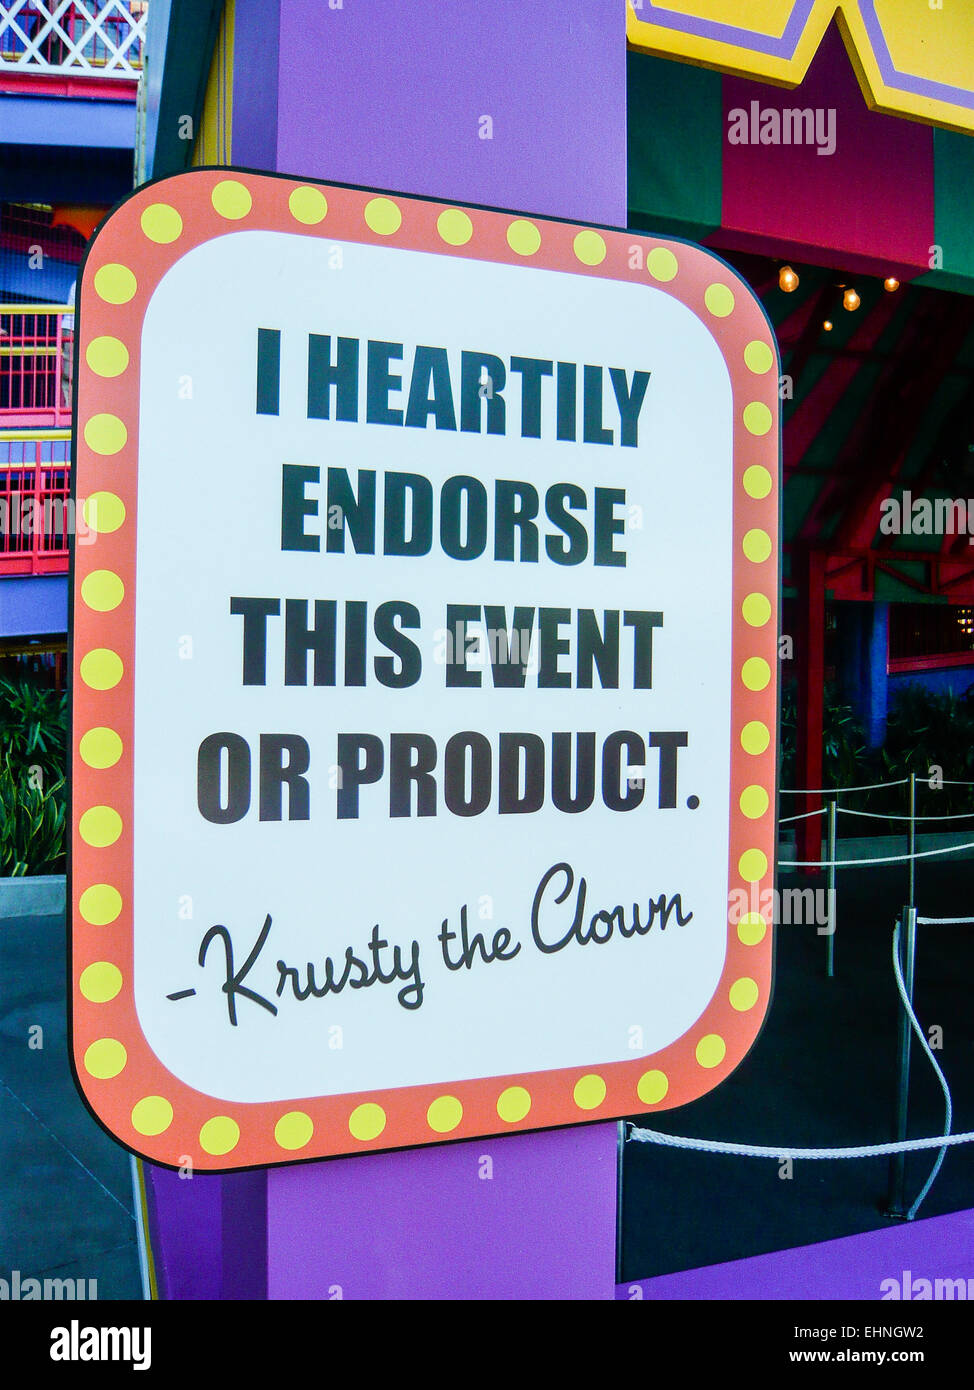 Sign 'I heartily endorse this event or product' by Krusty the Clown from The Simpsons Stock Photo